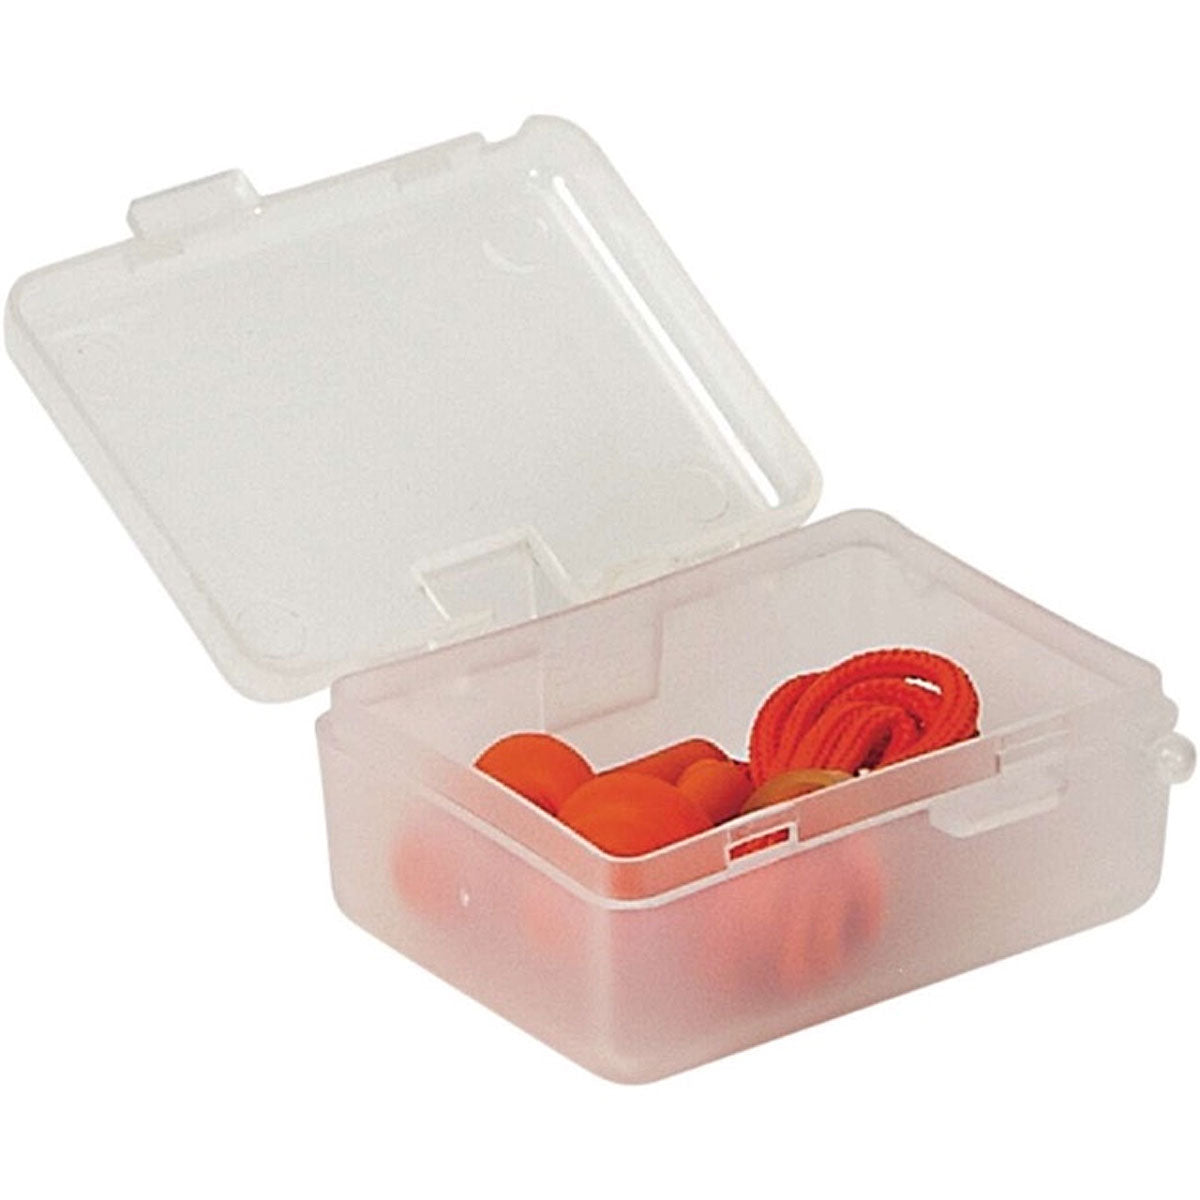 Deluxe Ear Plug with Cord and Small Case